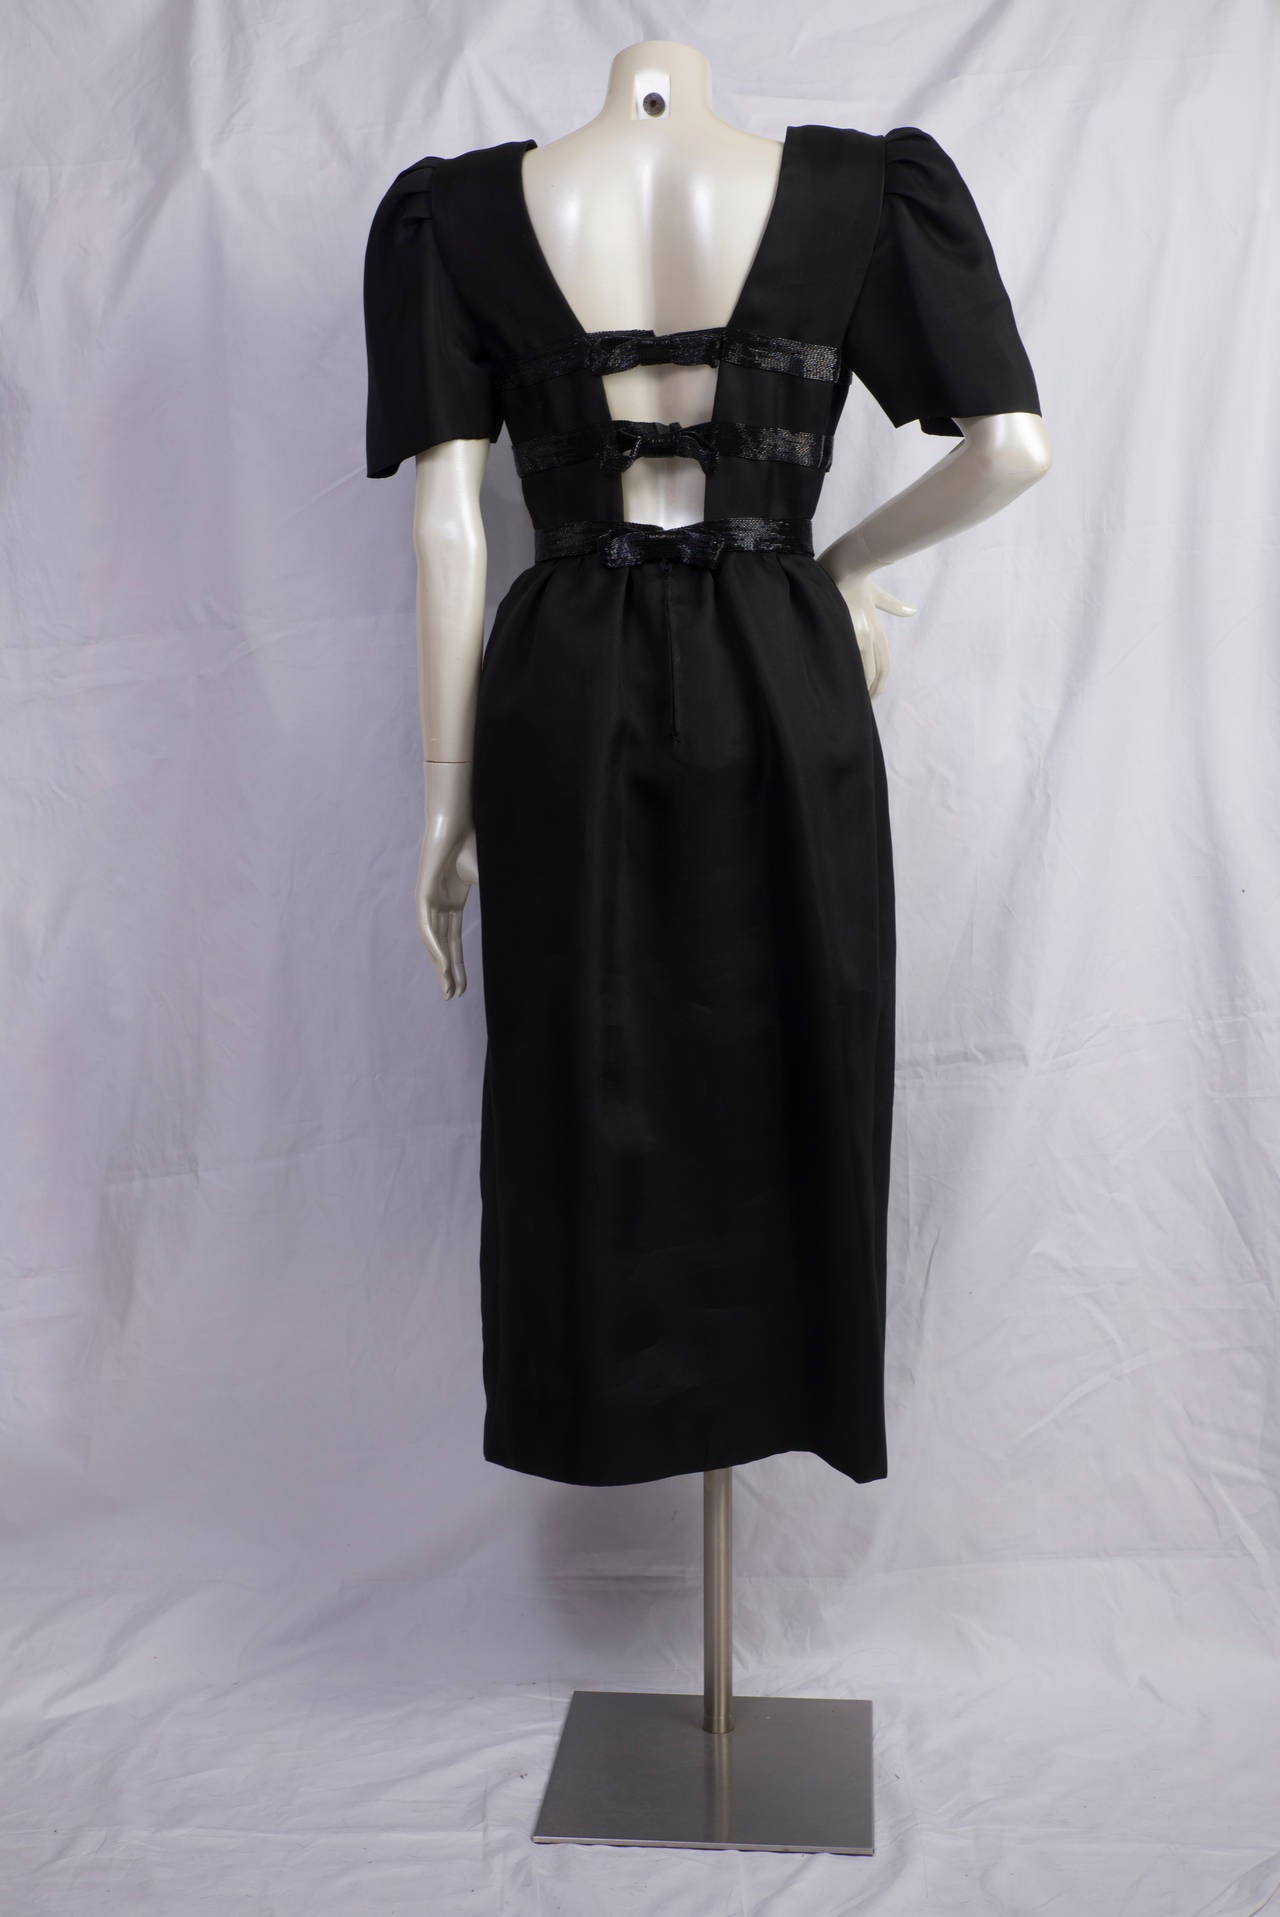 1980s Renato Balestra amazing black dress with 3 gorgeus bowes on the back
Never used
still with tags